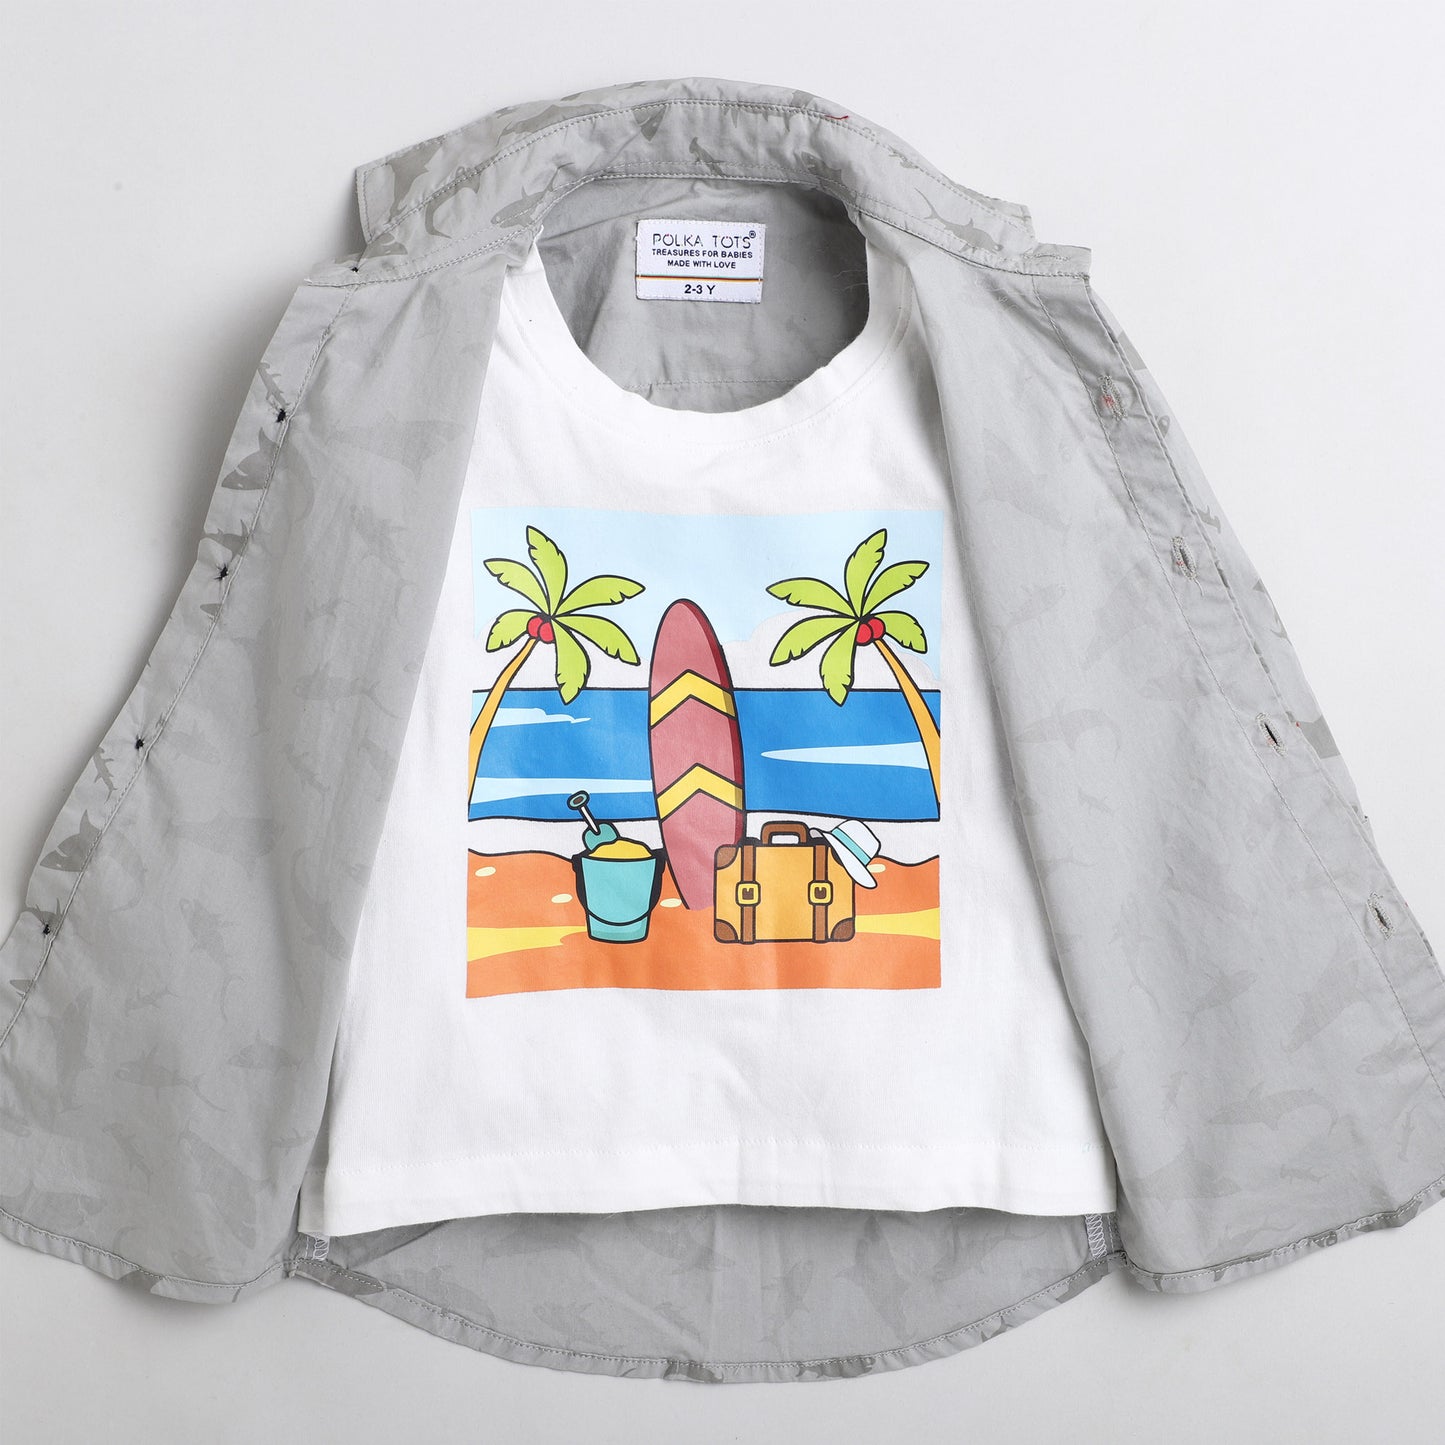 Polka Tots Cotton Full Sleeves Dolphin Print Shirt With Attached Tshirt - Grey